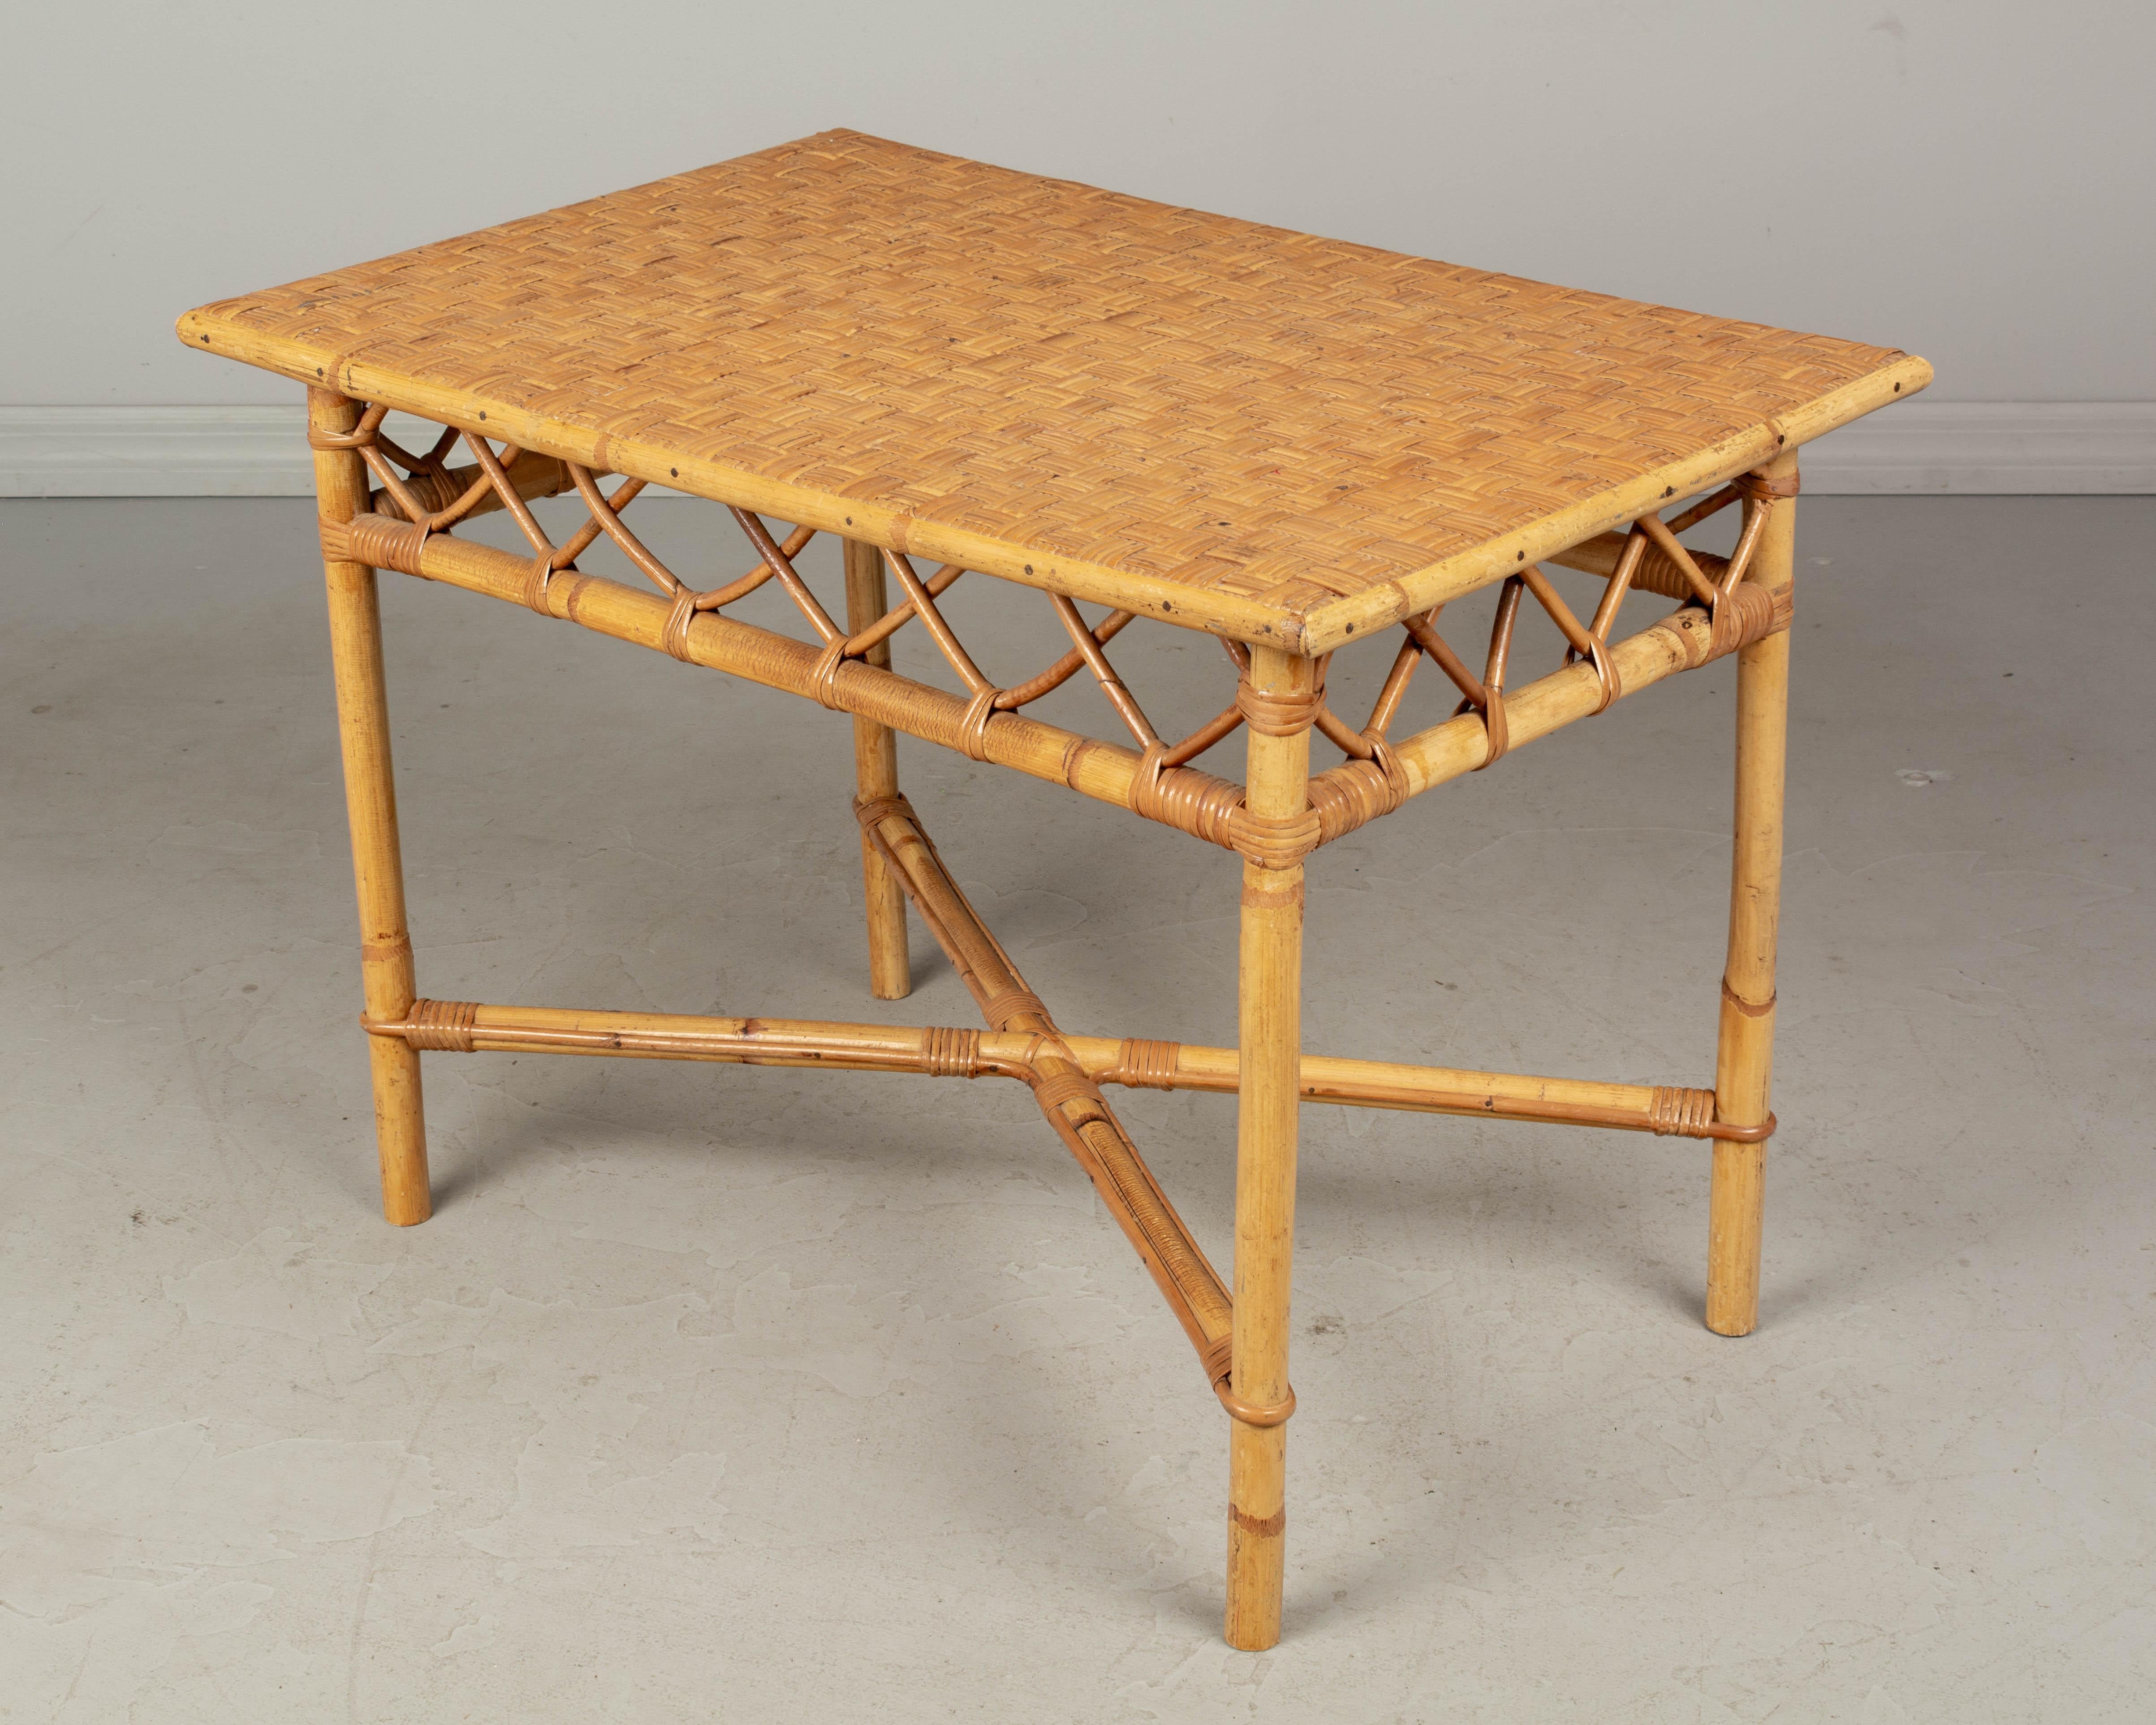 A mid century French rattan child's desk and chair. This small chair and matching desk are sturdy and in good condition. The desk has a woven rattan surface and may be used as a coffee table or side table.
Measures: Table: 30.5